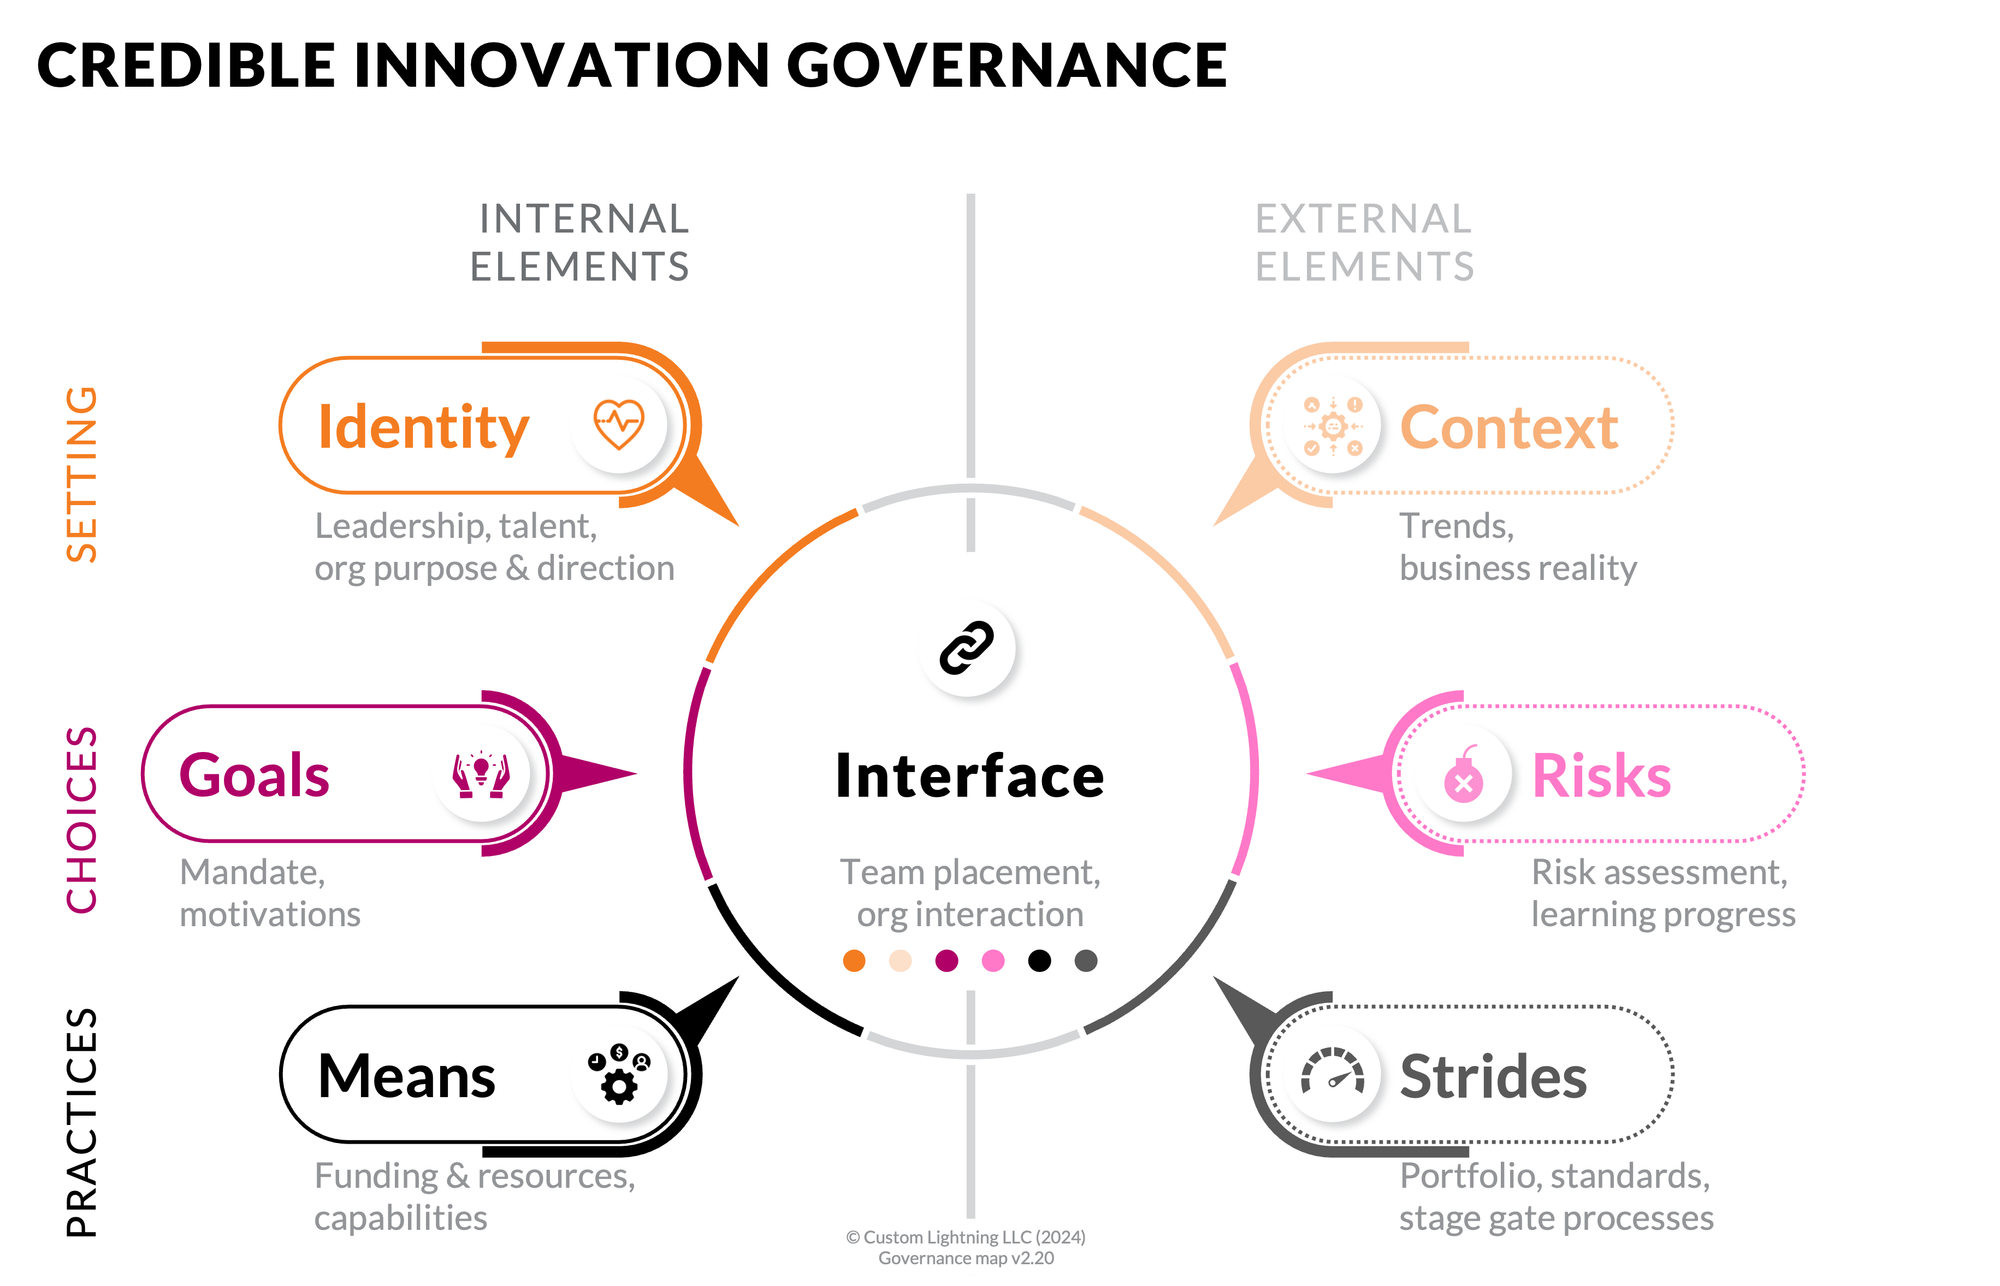 A colorful framework of 7 "credible innovation governance" topics (3 each at left & right, 1 at center), with topic annotations